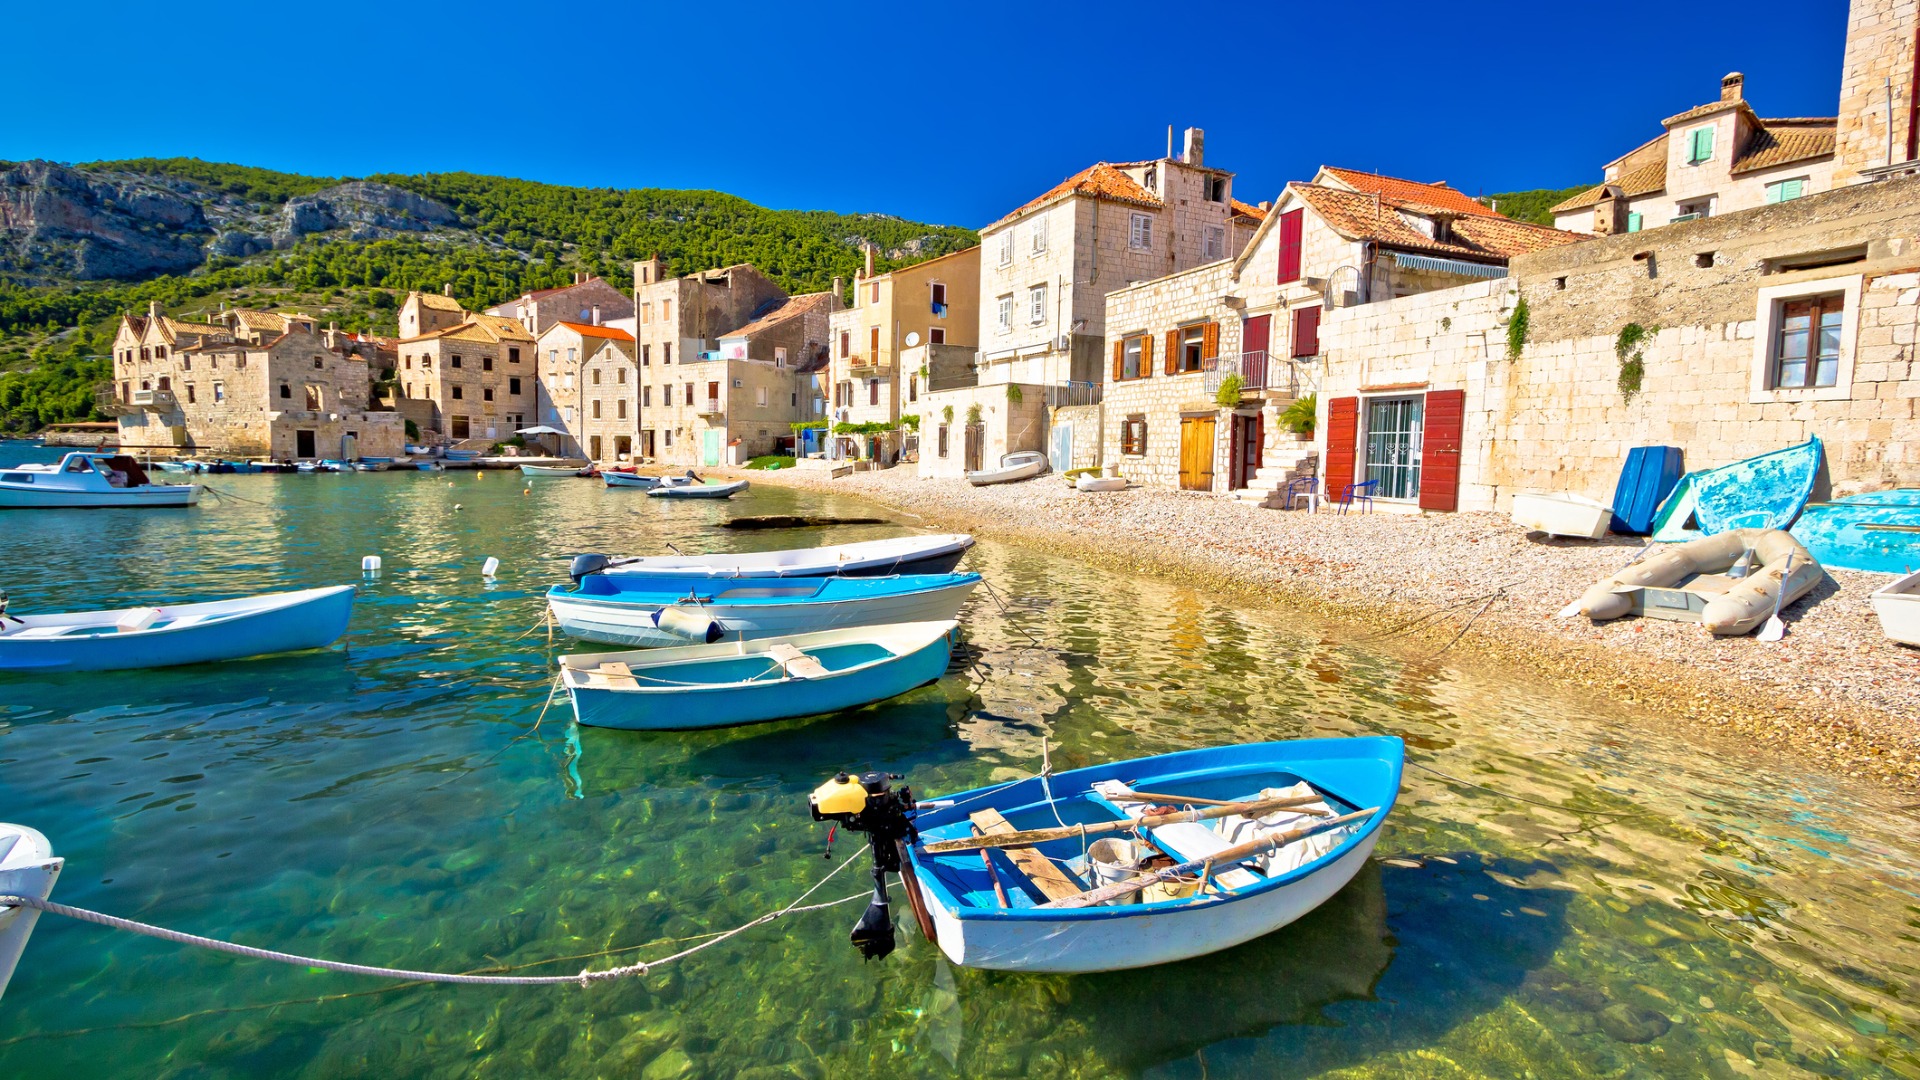 This image shows small wooden fishing boats resting on the crystal clear waters. The shore is lined by traditional stone houses with colorful doors and shutters. 